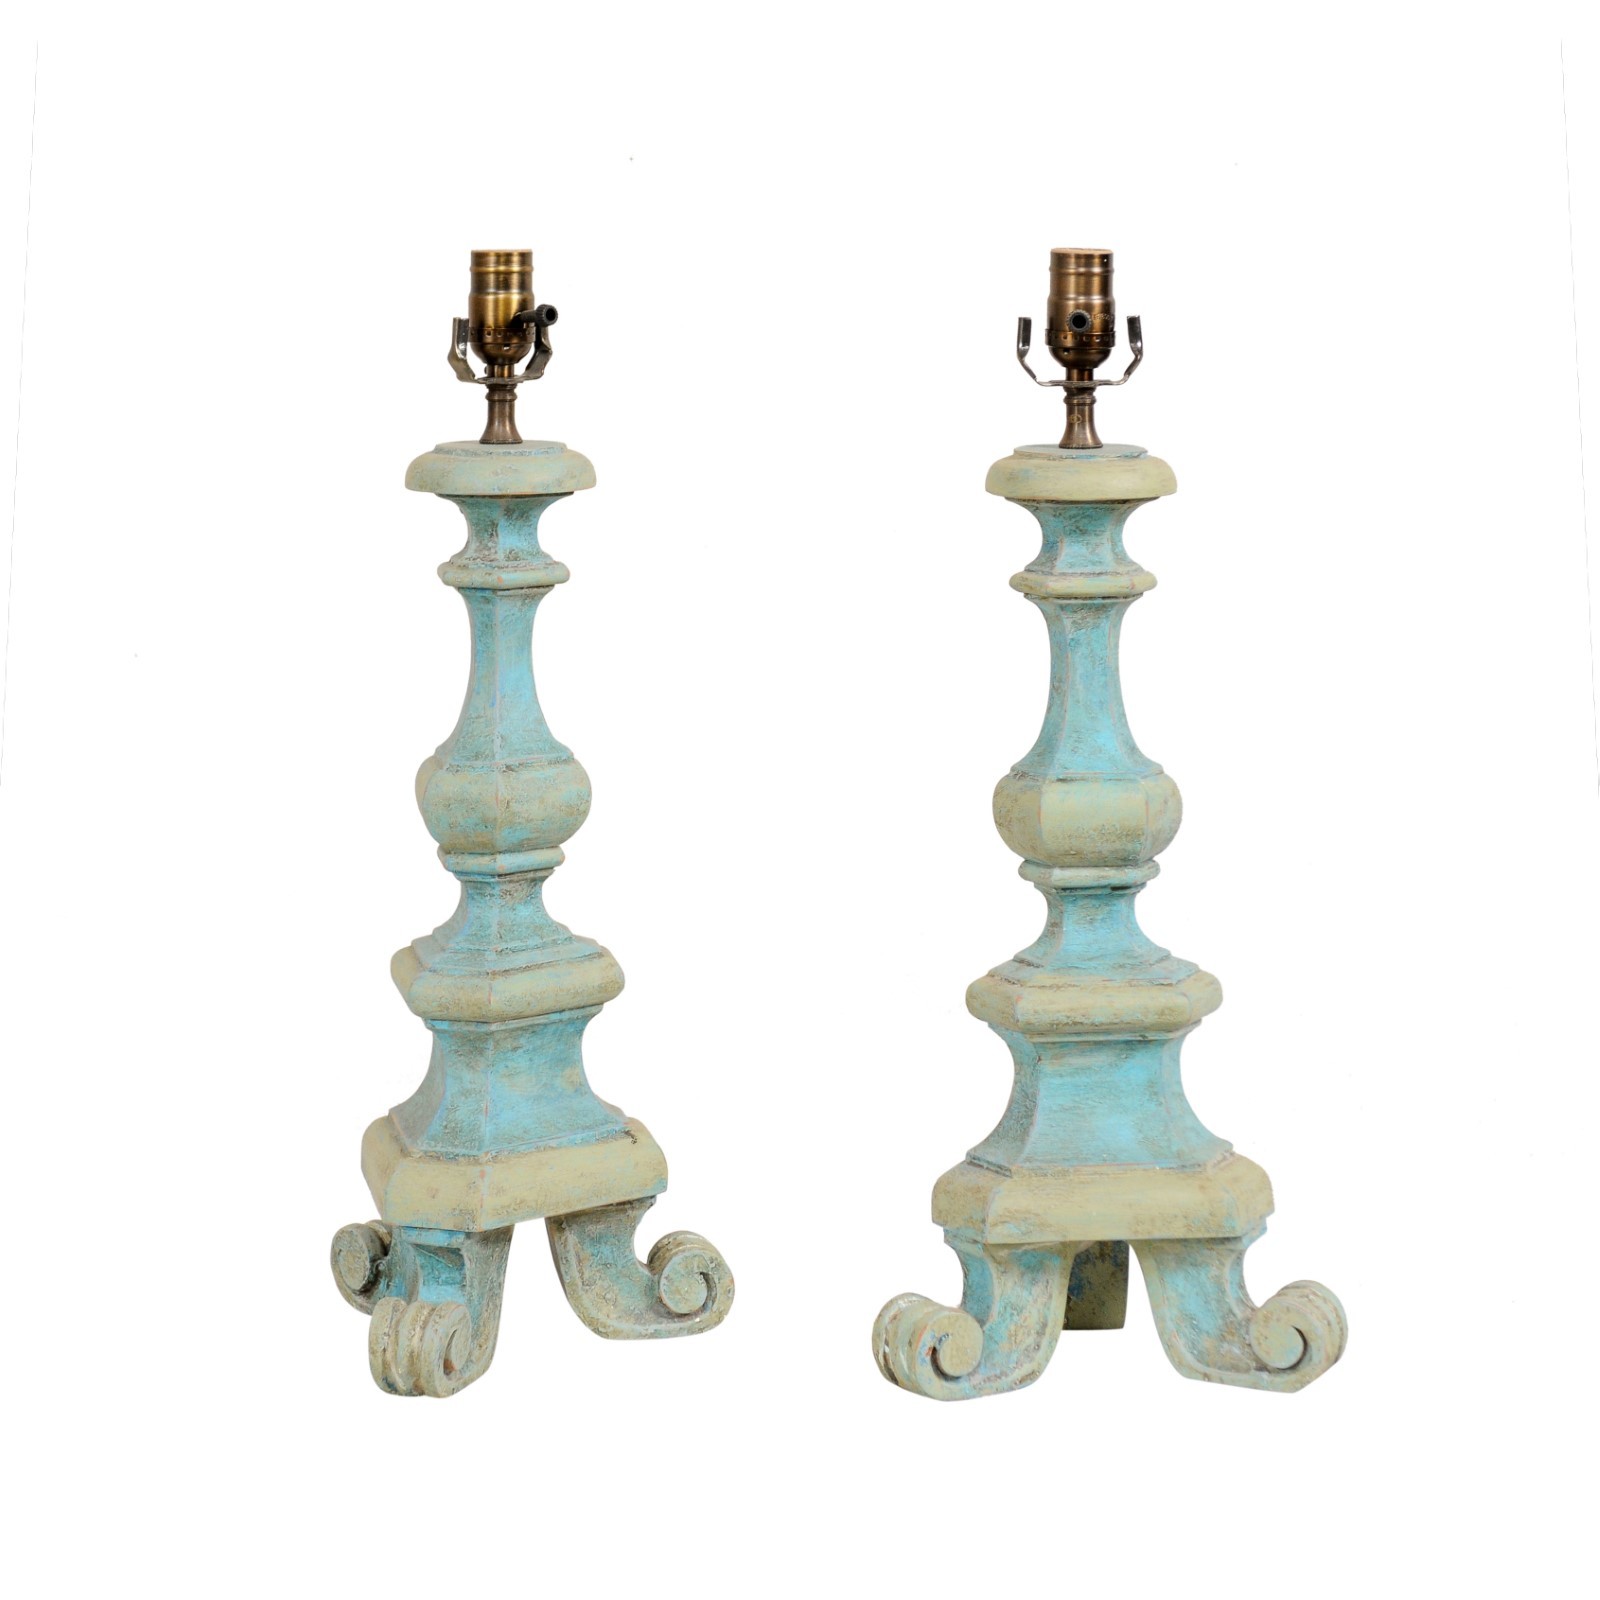 A Pair Candlestick Style Lamps in Turquoise